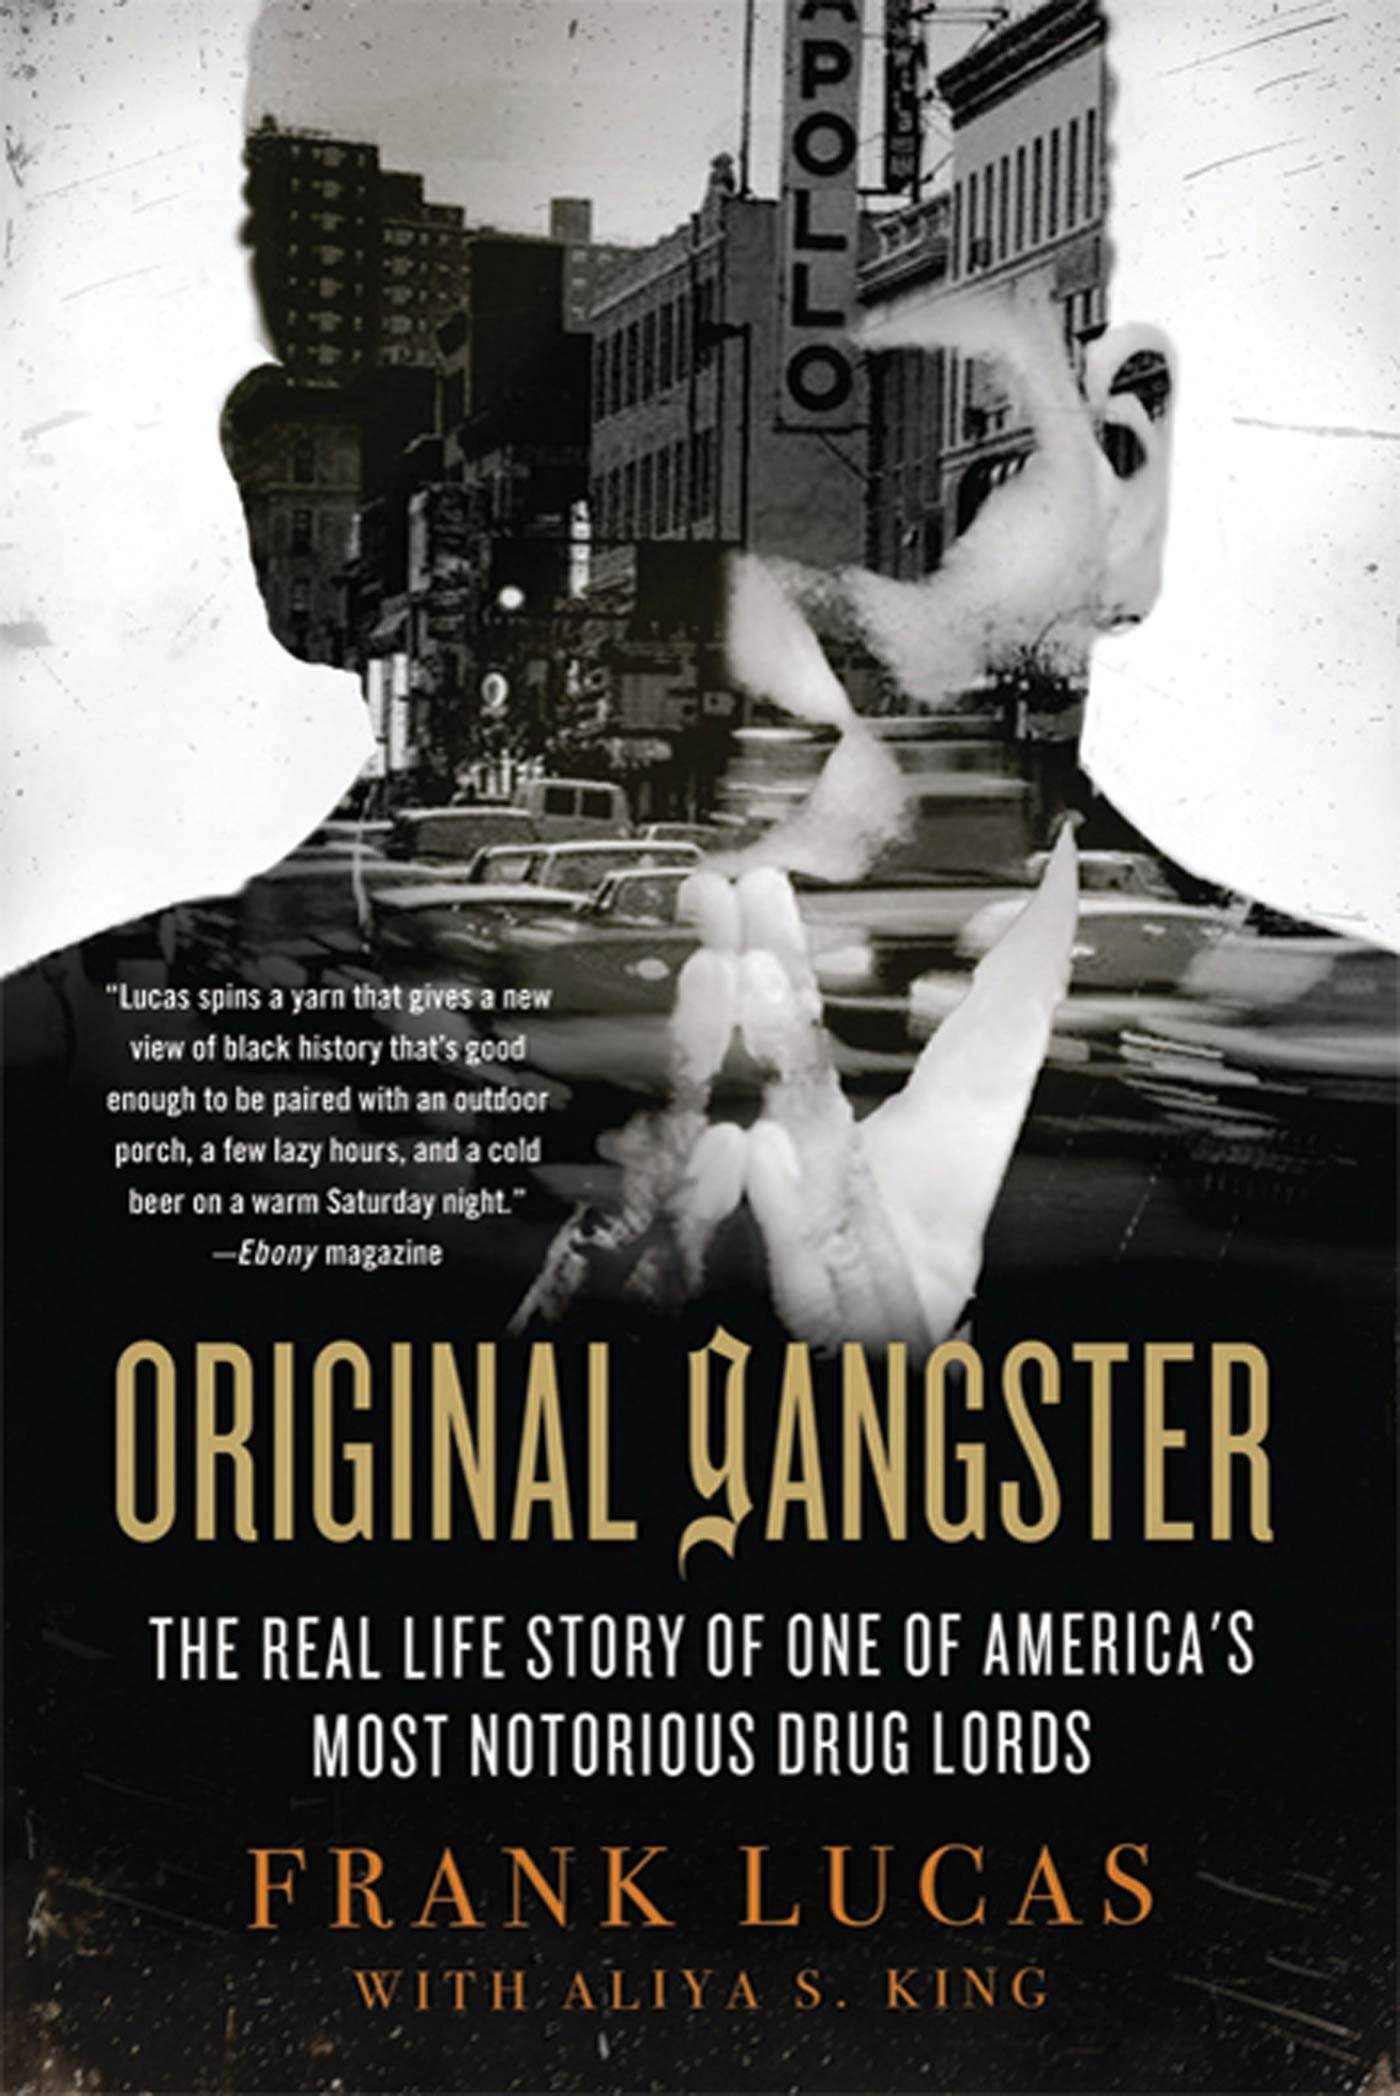 Original Gangster: The Real Life Story of One of America's Most - SureShot Books Publishing LLC